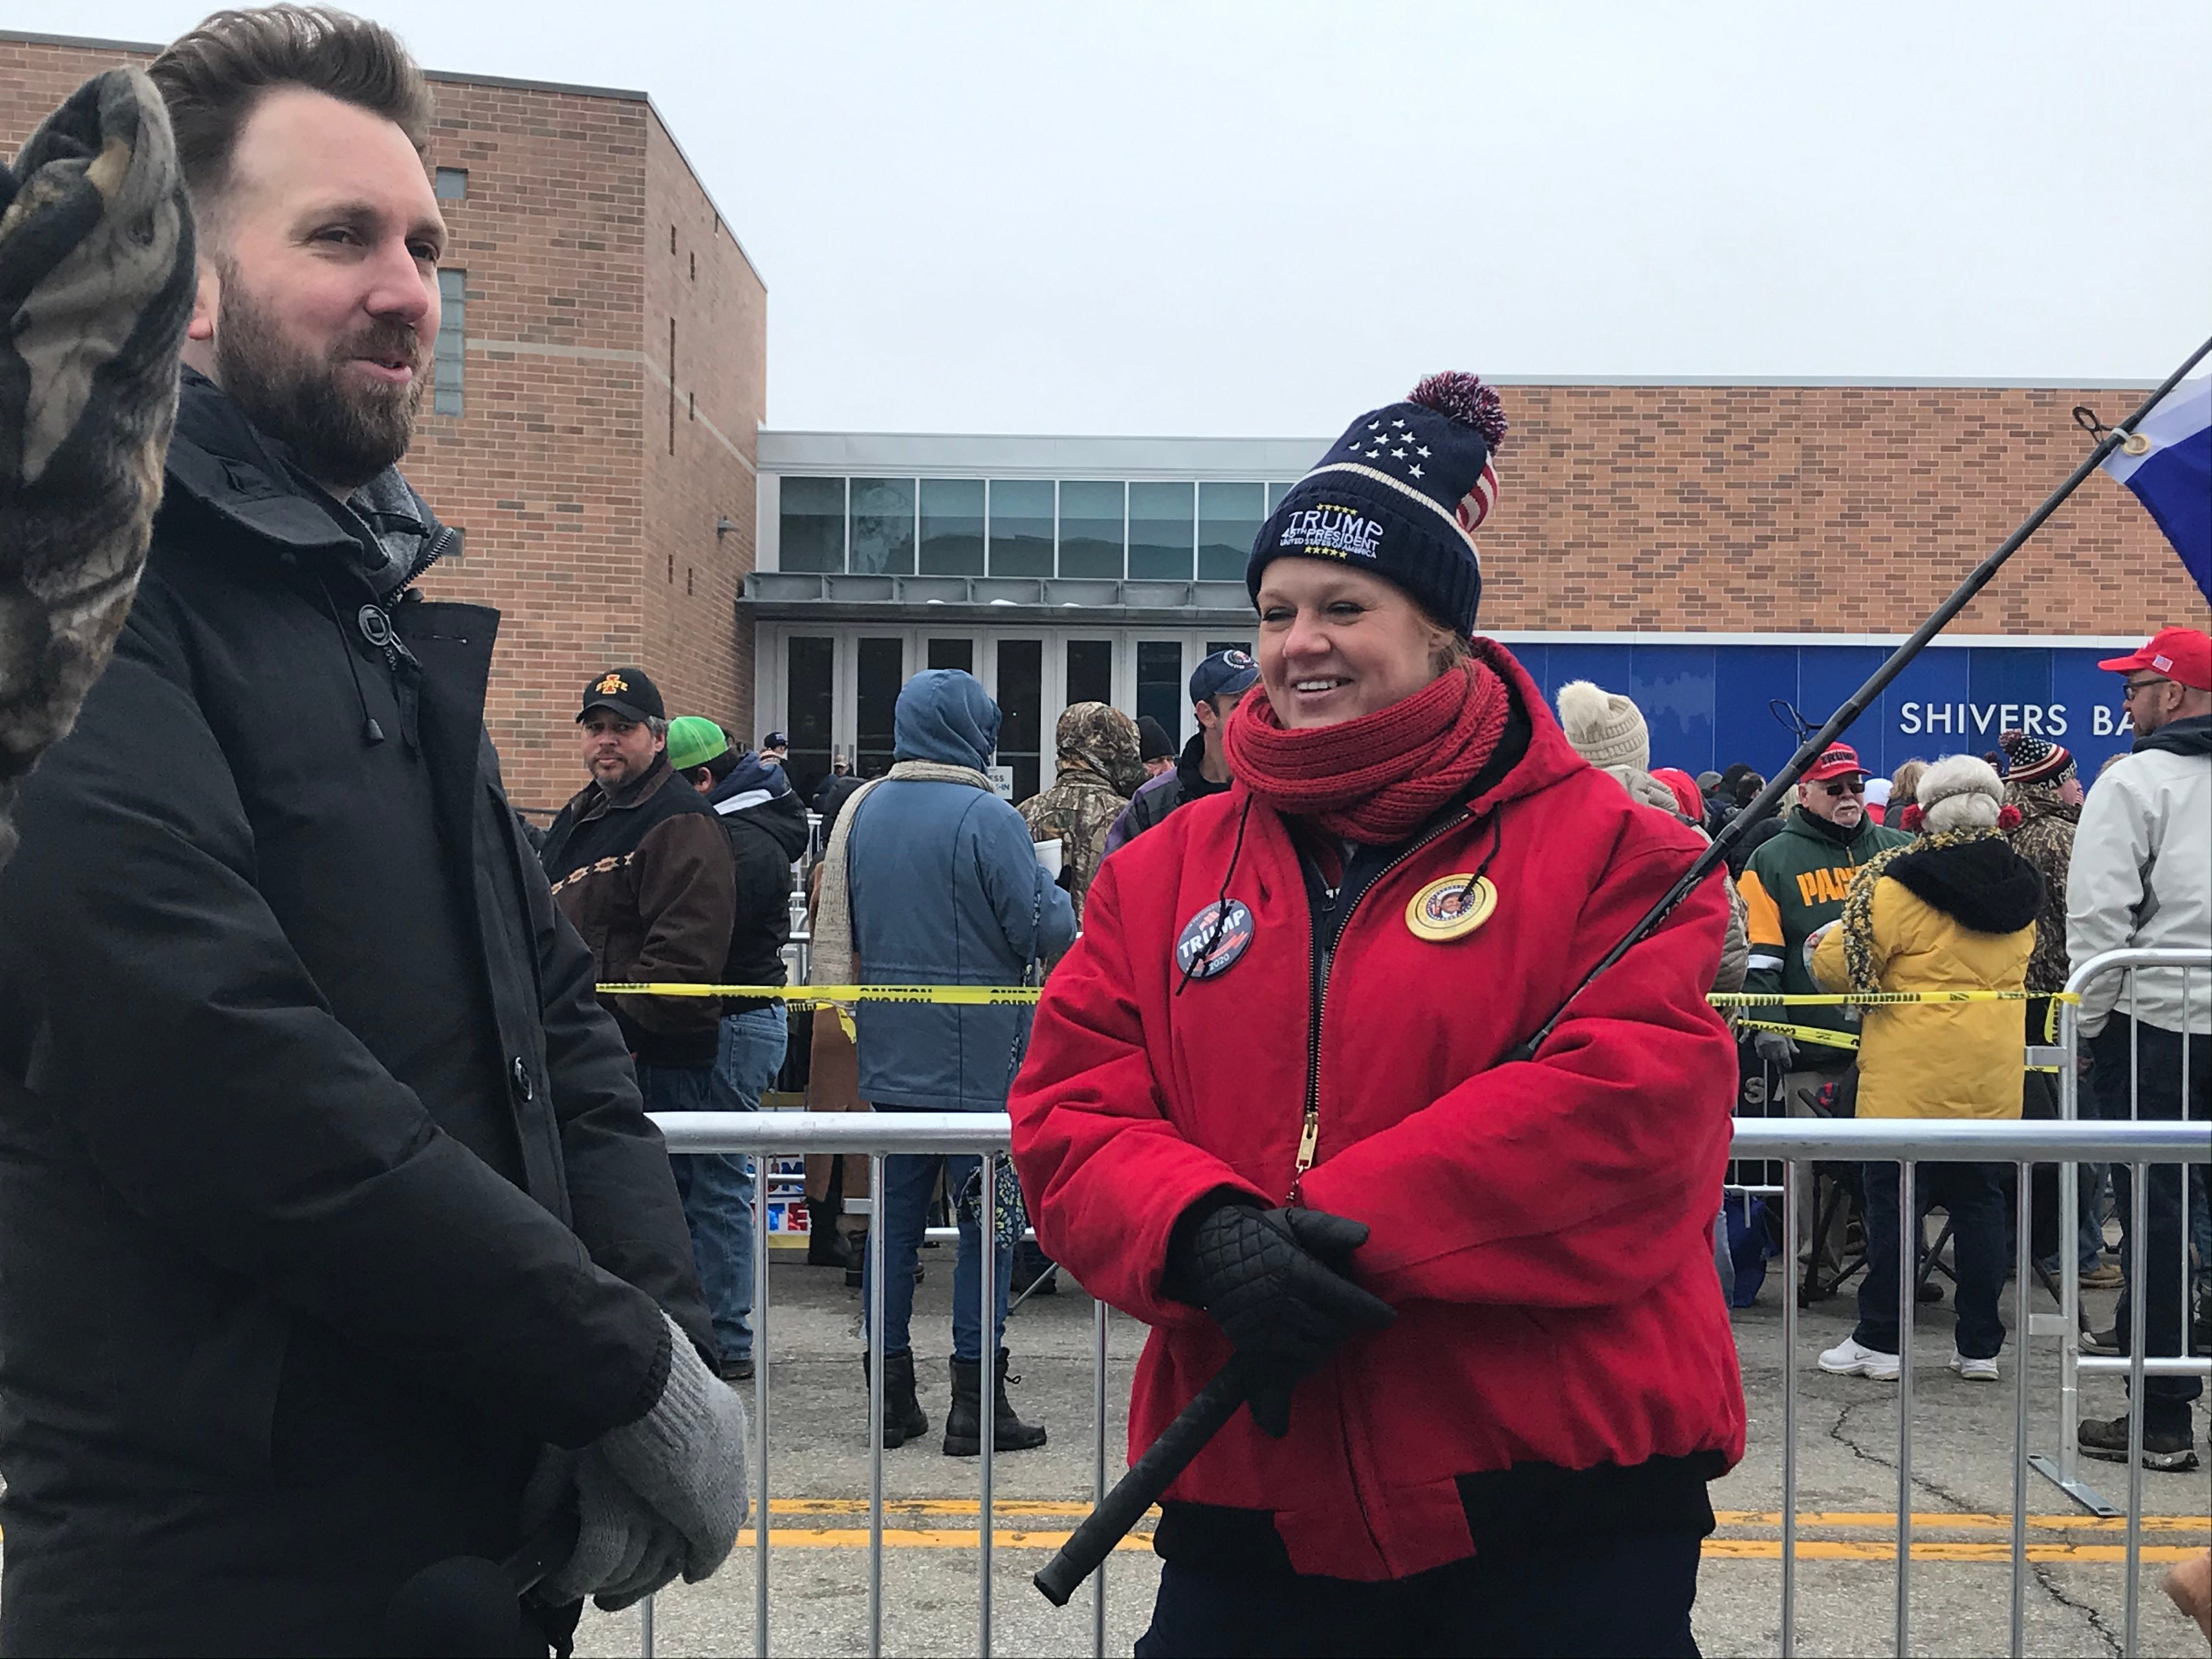 The Daily Show’s Jordan Klepper interviews Jaimi Fay outside the Knapp Center on the Drake University Campus about her support for President Trump ahead of a rally.